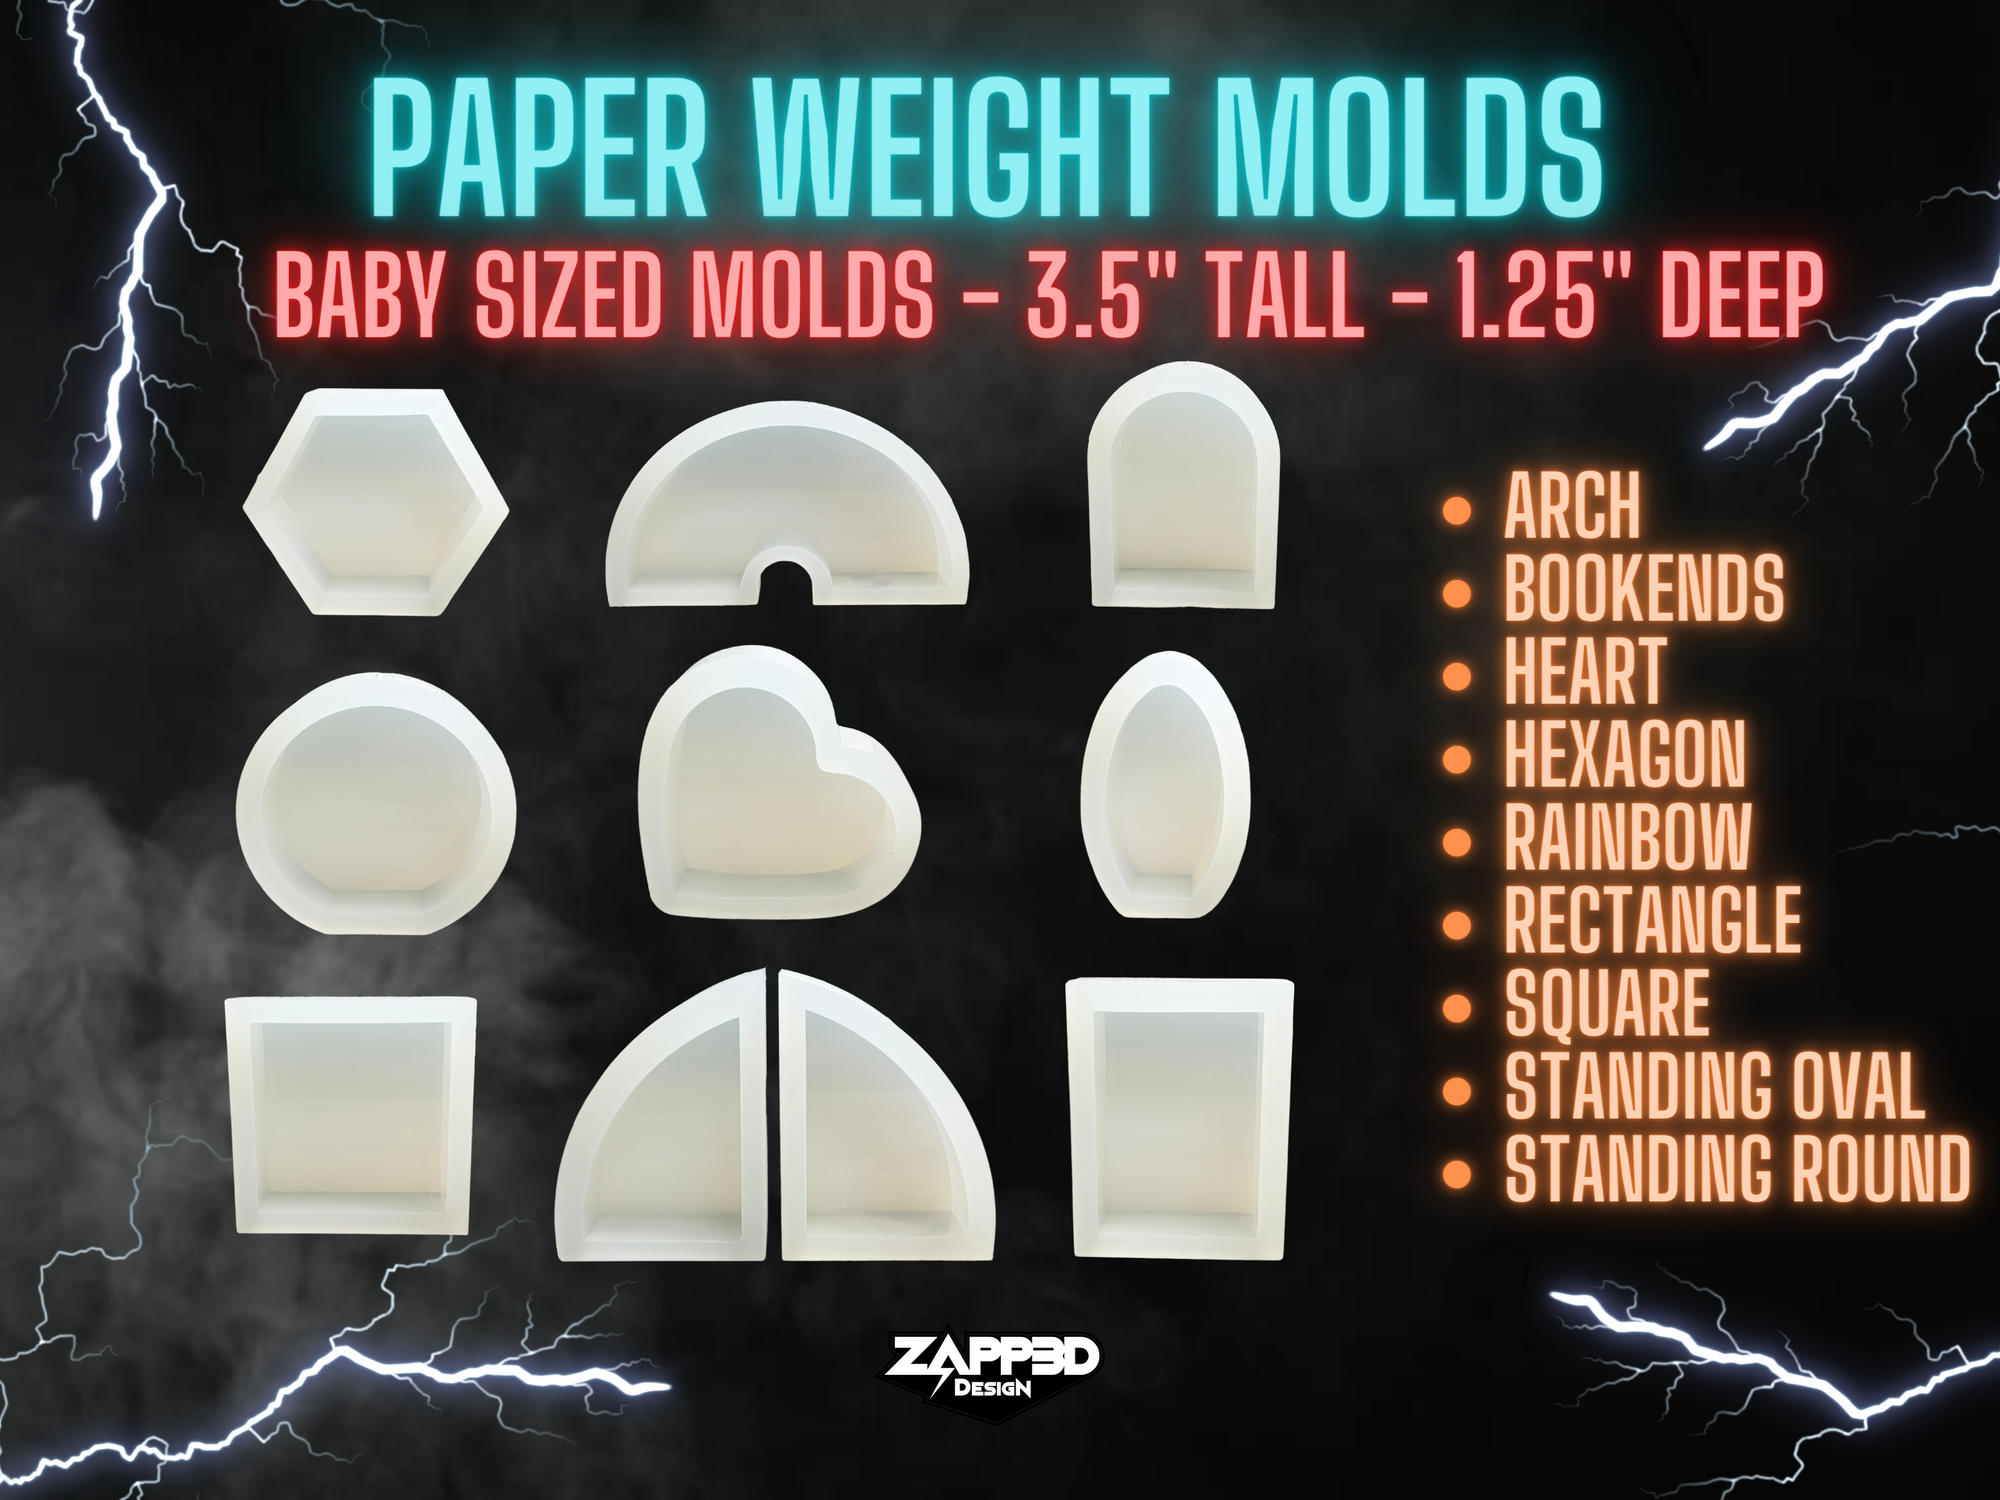 Paper Weight Molds | 9 Shapes | Baby Arch Molds, Pocket Collection Molds, Floral Block Mold, Hexagon Molds, Memorial Mold, Book End Molds